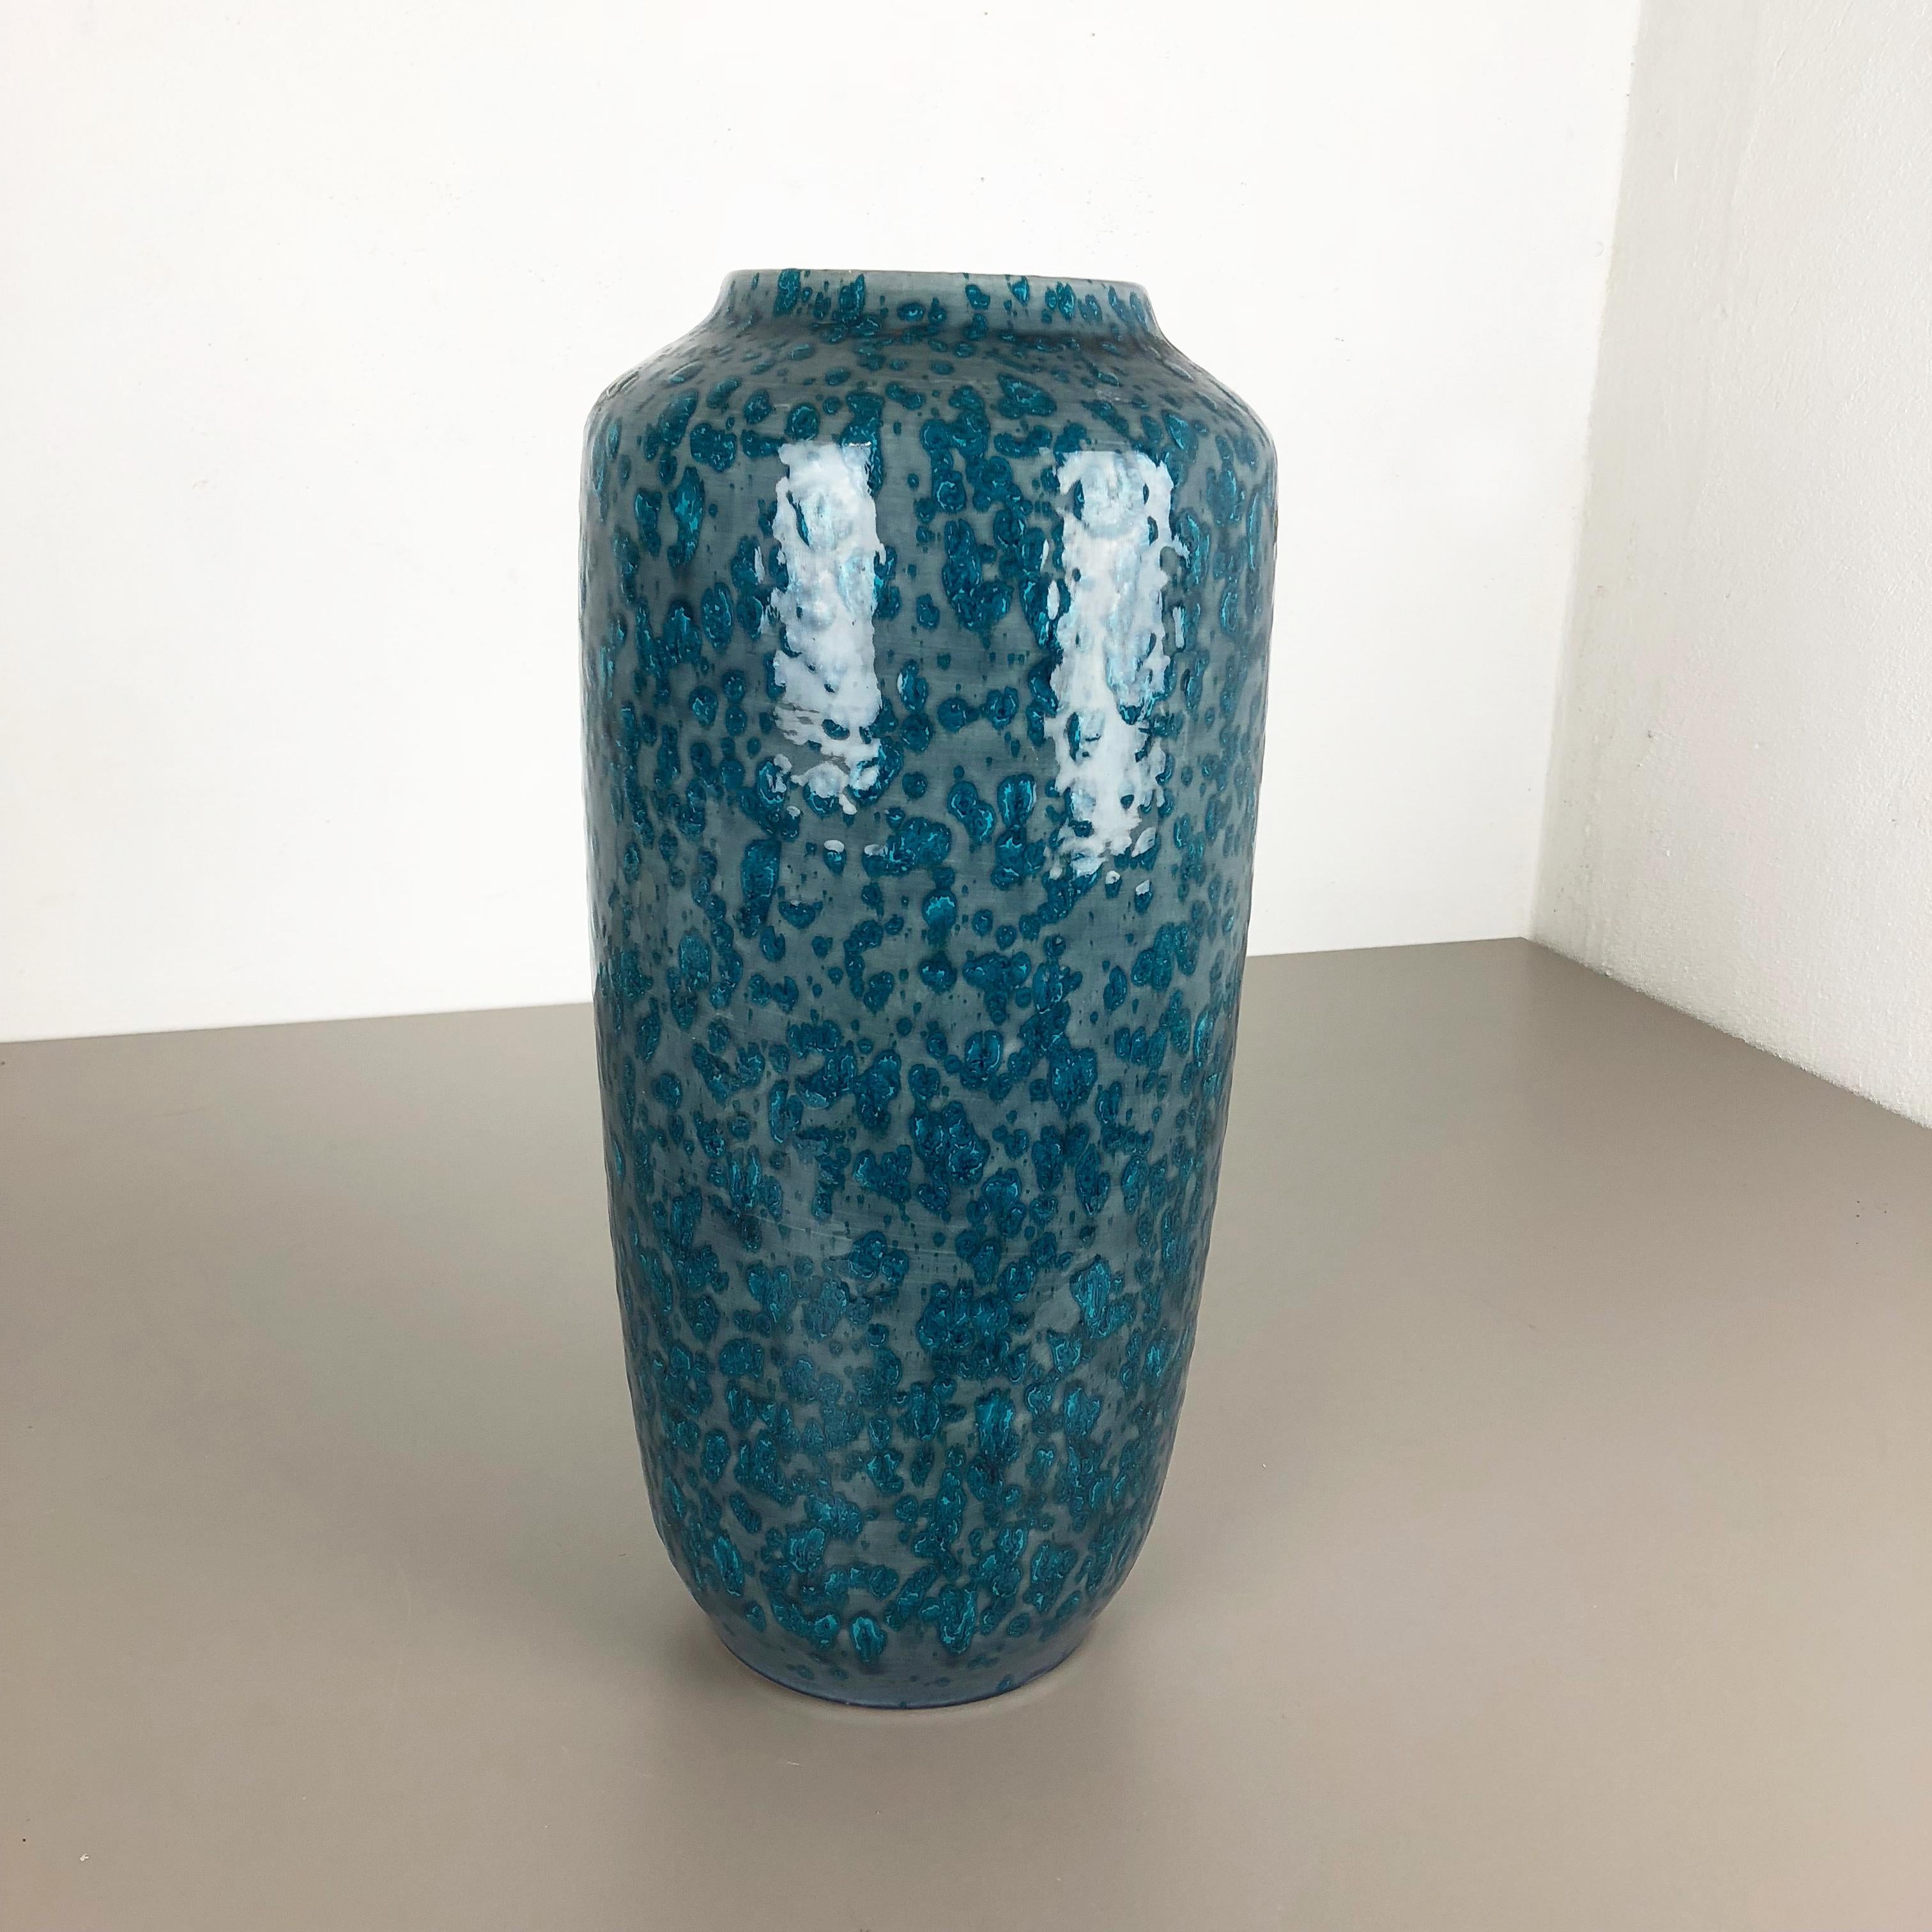 Article:

Fat lava art vase extra large version


Model: 517-45


Producer:

Scheurich, Germany



Decade:

1970s


This original vintage vase was produced in the 1970s in Germany. It is made of ceramic pottery in fat lava optic